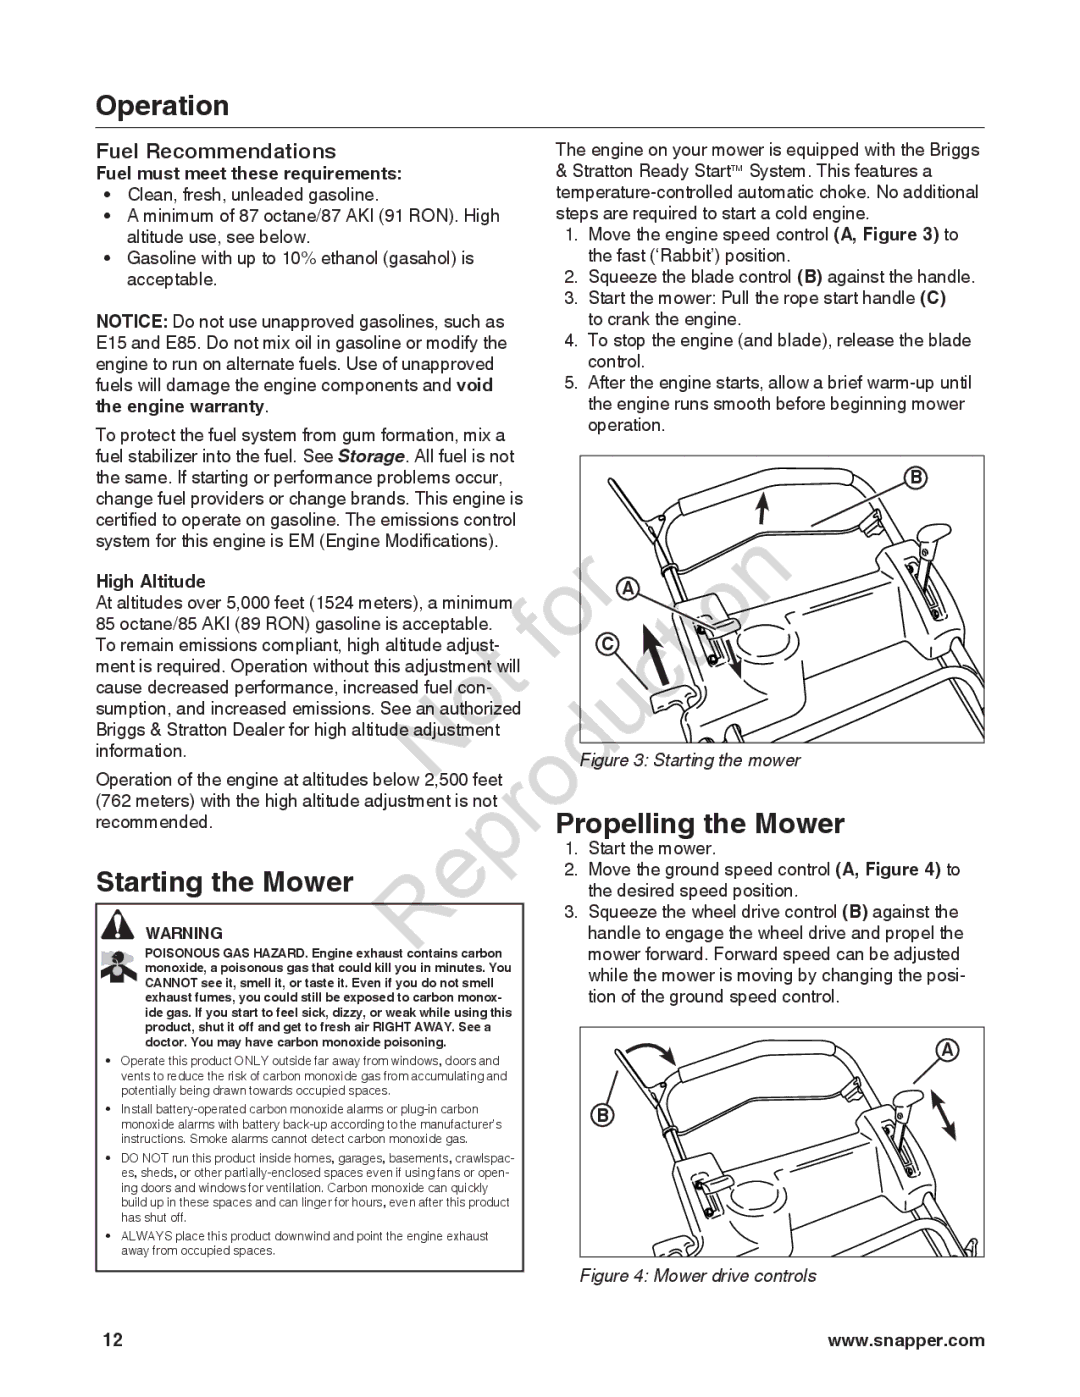 Snapper 7800841-01, 780084-01, 7800842-01 manual Propelling the Mower, Starting the Mower, Fuel Recommendations 